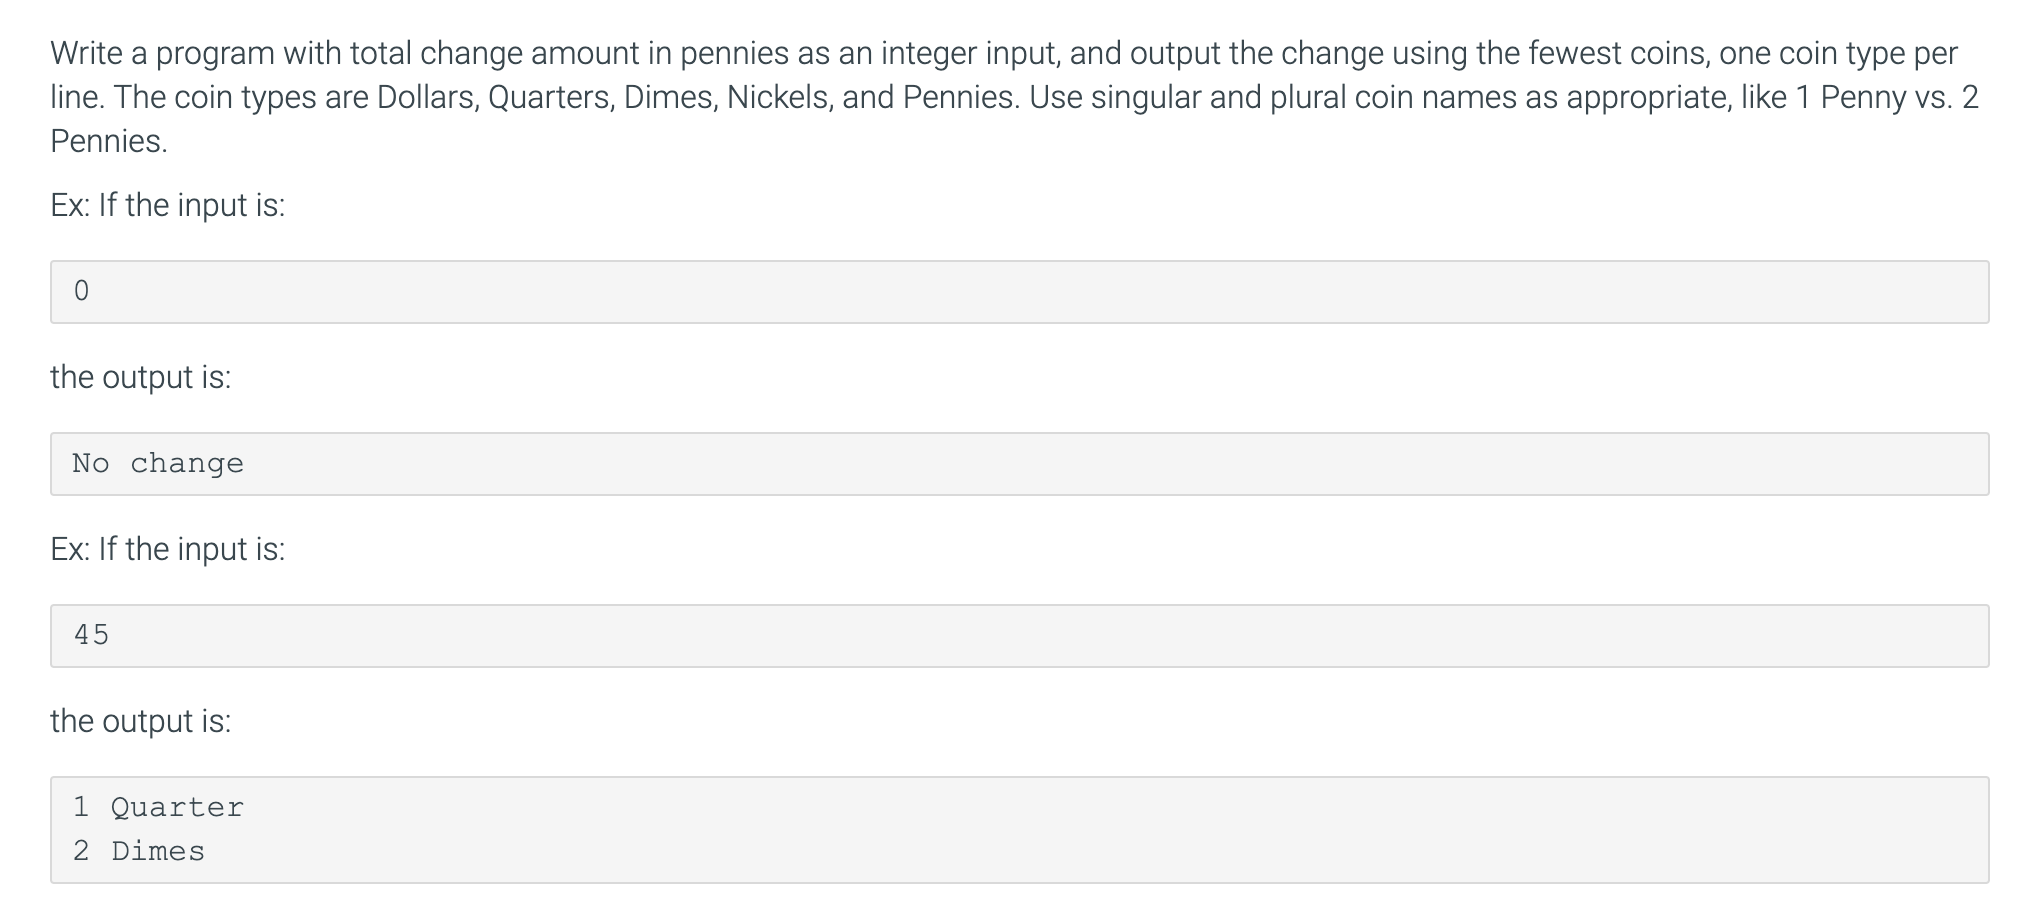 Write a program with total change amount in pennies as an integer input, and output the change using the fewest coins, one coin type per
line. The coin types are Dollars, Quarters, Dimes, Nickels, and Pennies. Use singular and plural coin names as appropriate, like 1 Penny vs. 2
Pennies.
Ex: If the input is:
the output is:
No change
Ex: If the input is:
45
the output is:
1 Quarter
2 Dimes
